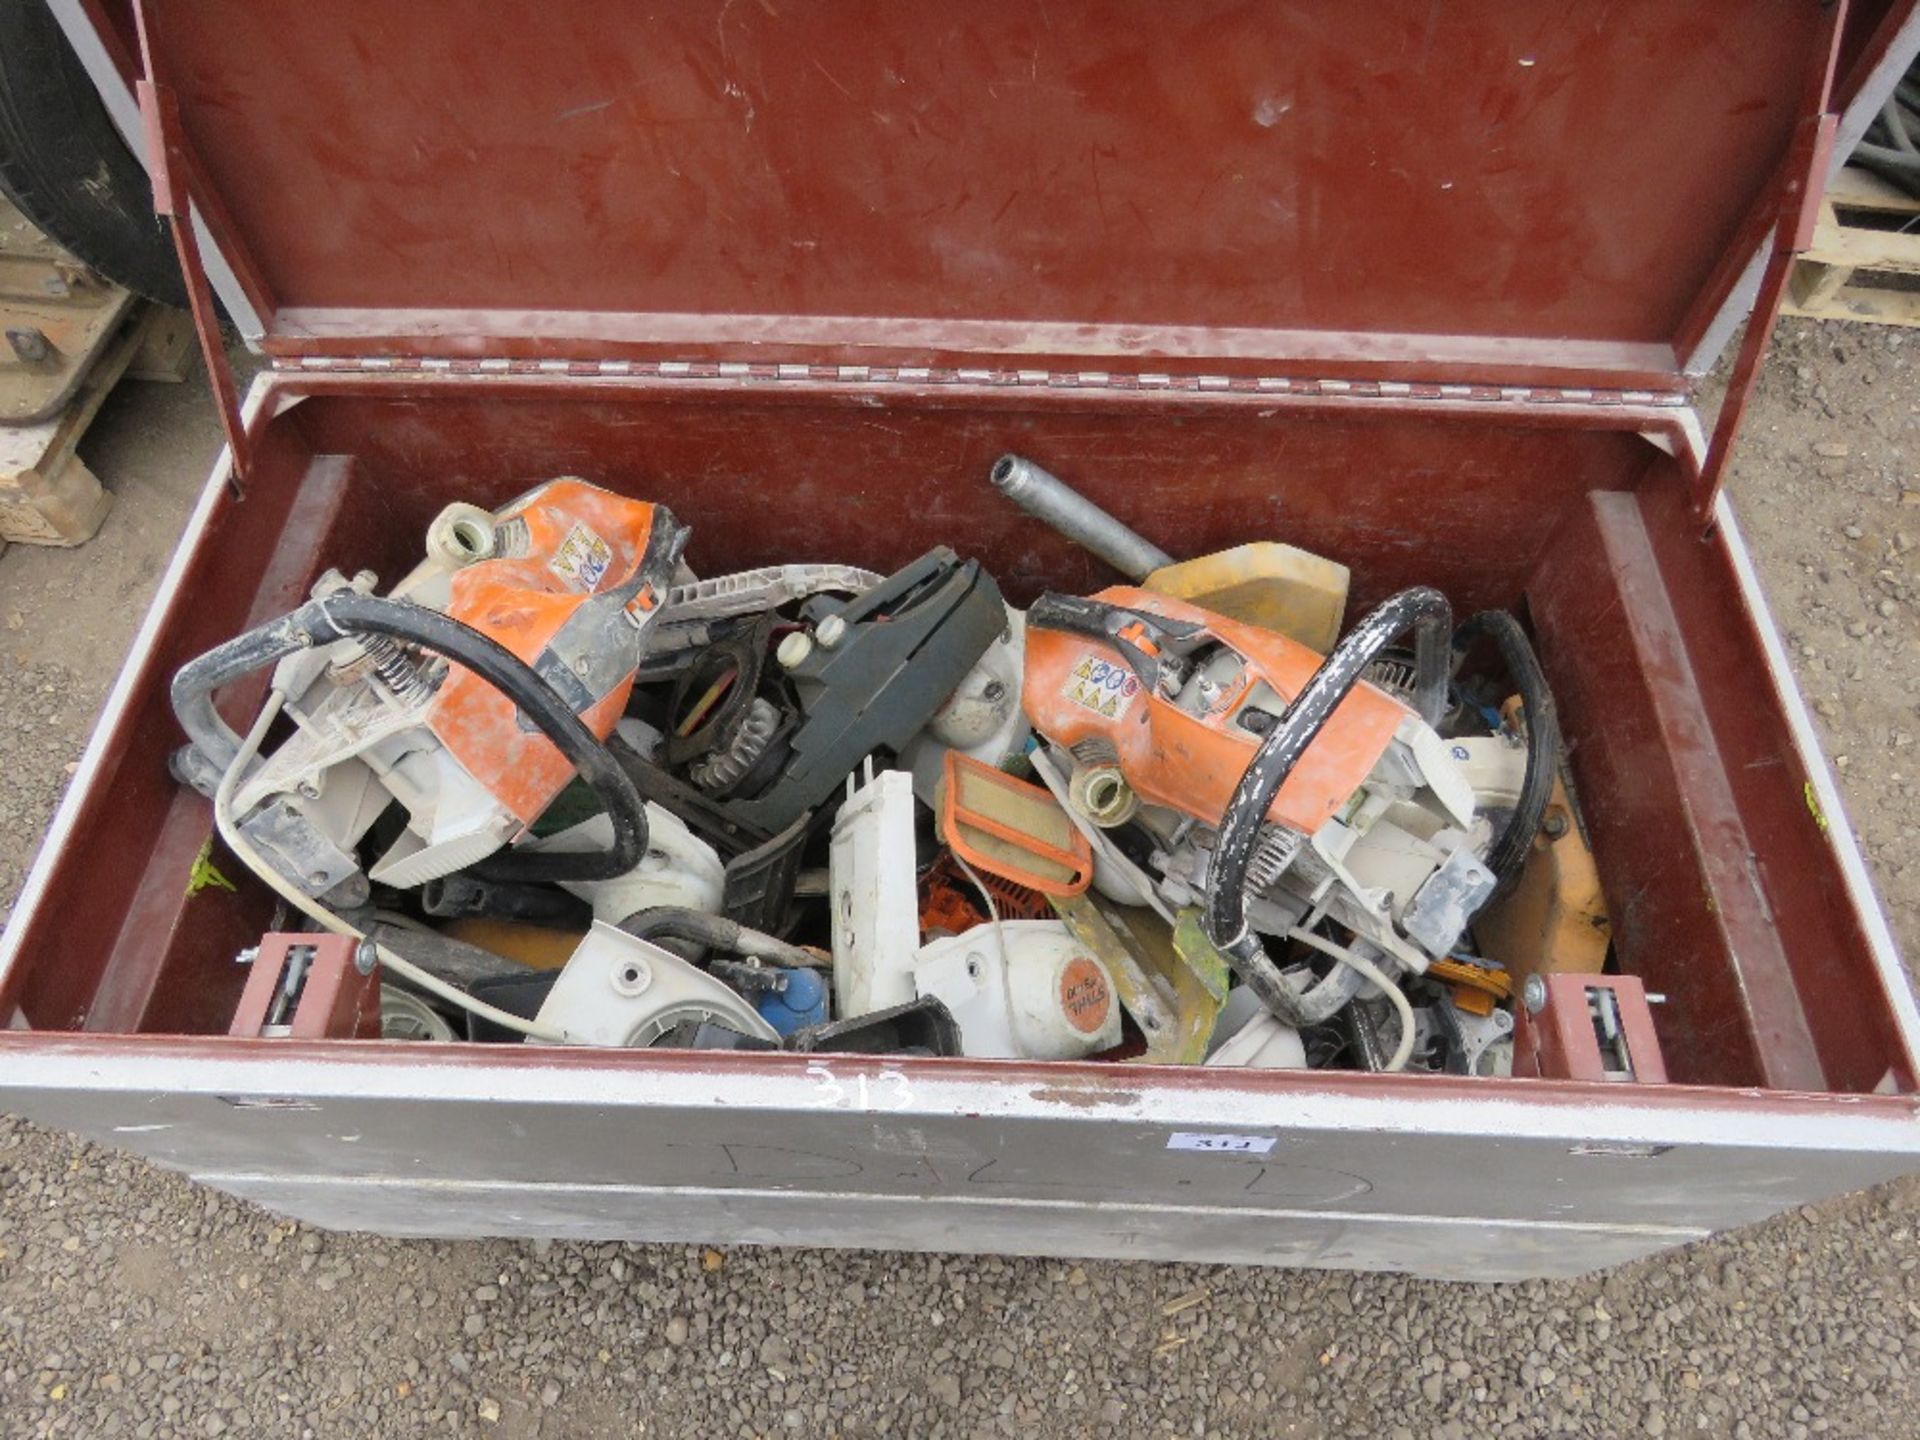 TOOL BOX CONTAINING STIHL PETROL SAW PARTS ETC. SOURCED FROM DEPOT CLOSURE. - Image 4 of 4